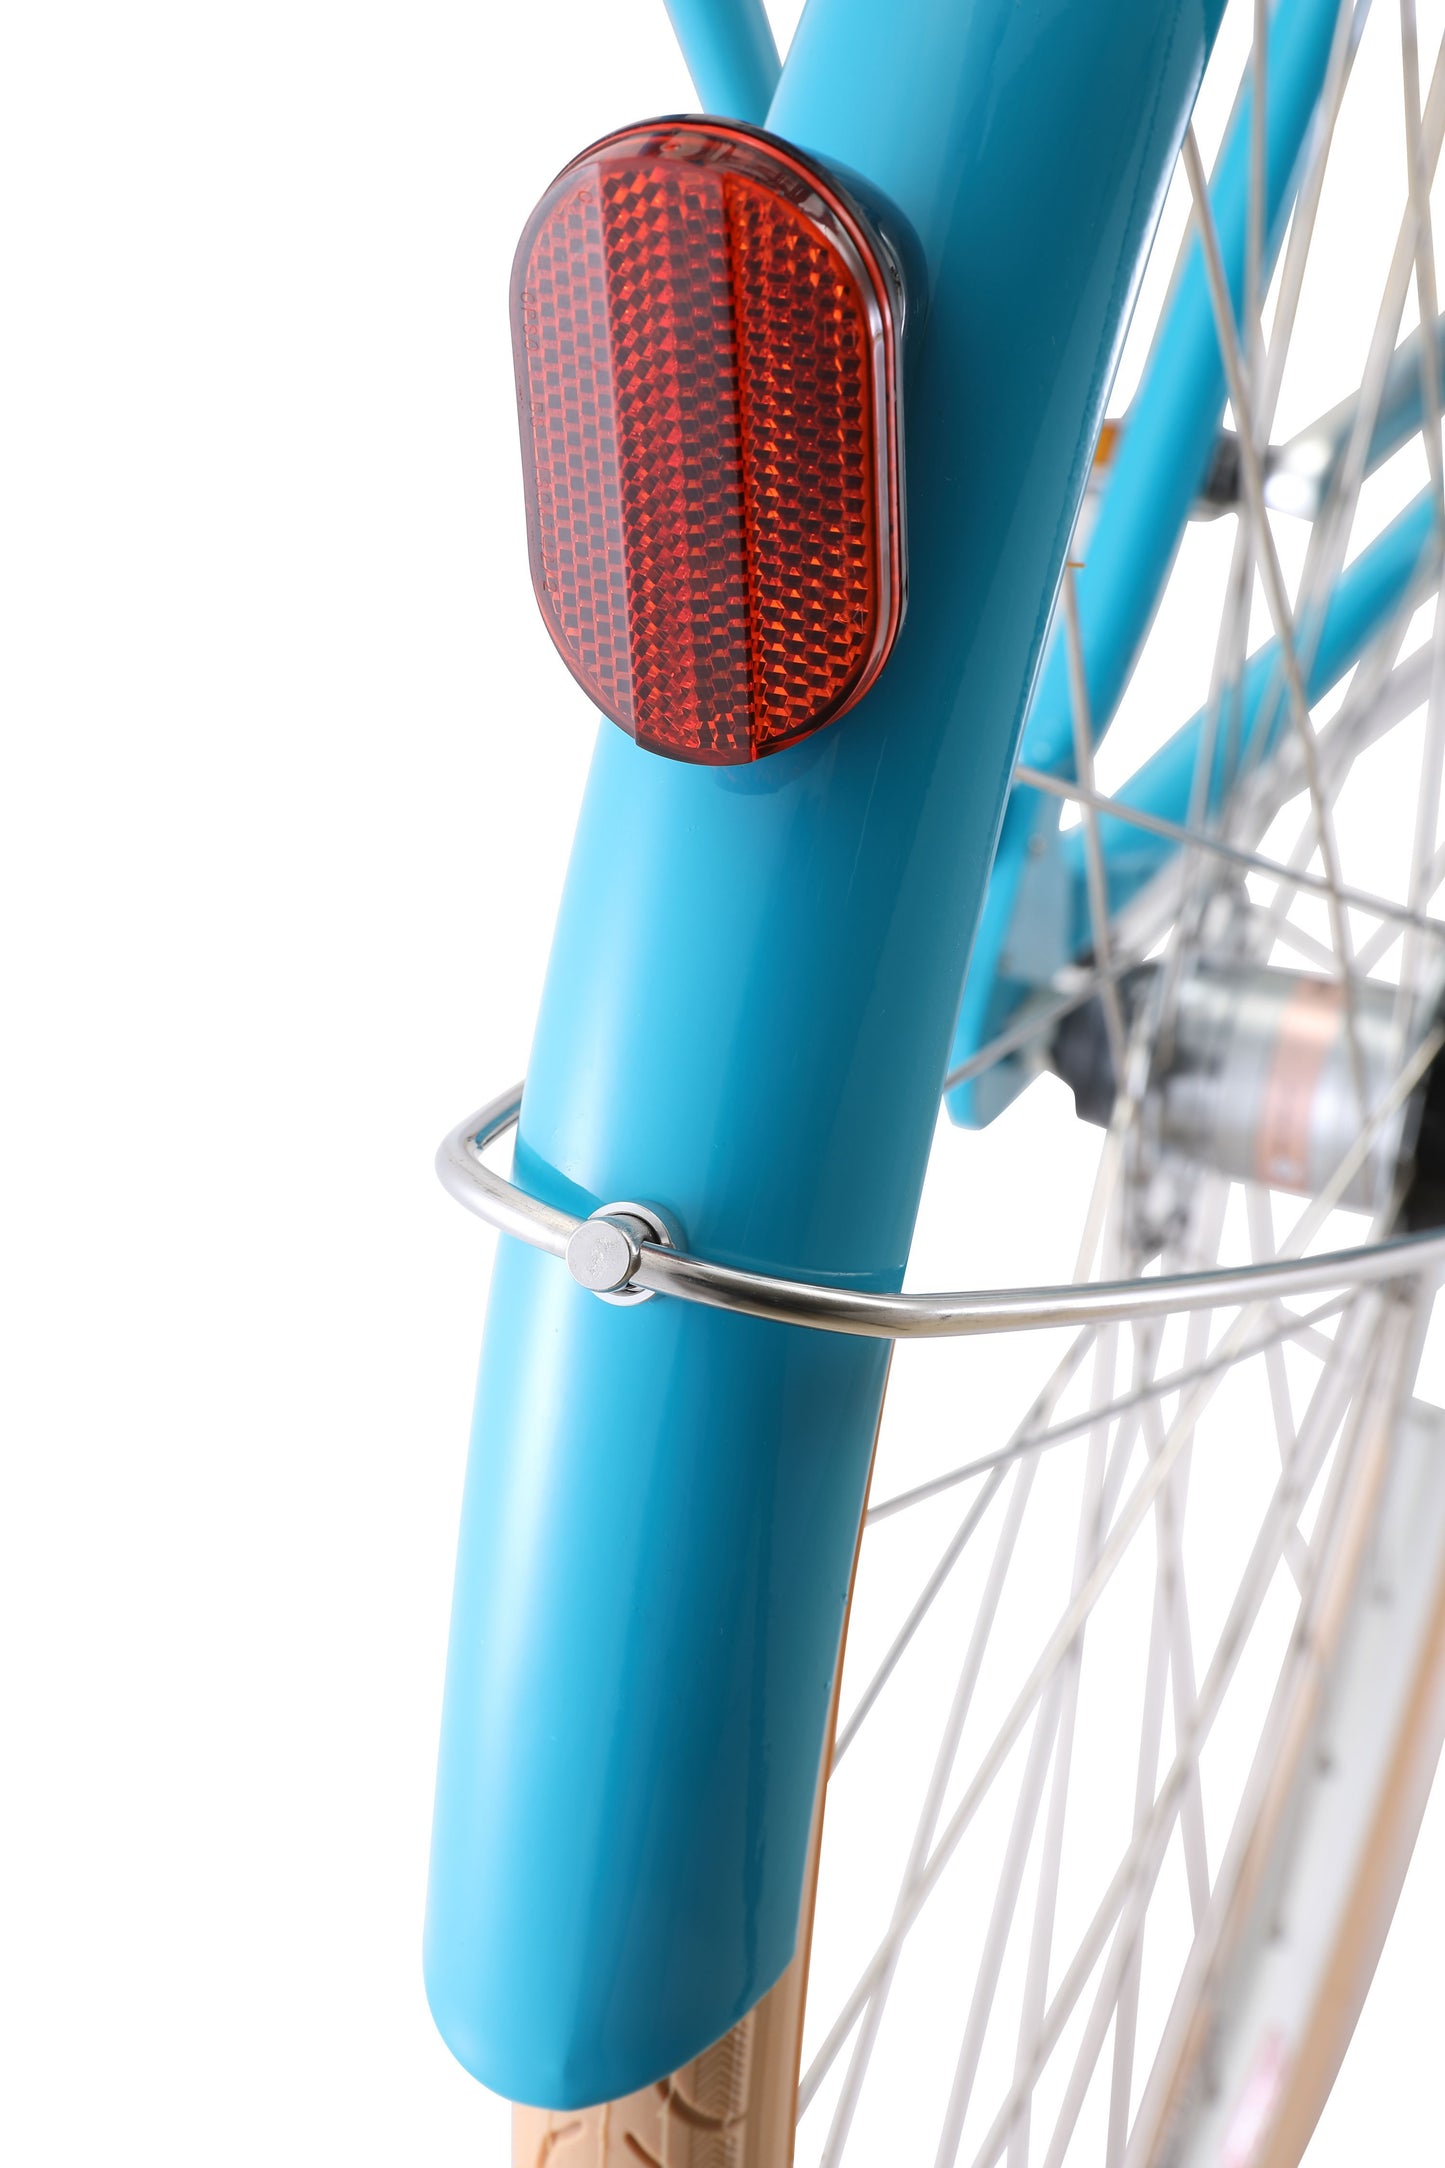 Ladies Deluxe Vintage Bike in Aqua showing rear mudguard and red reflector from Reid Cycles Australia